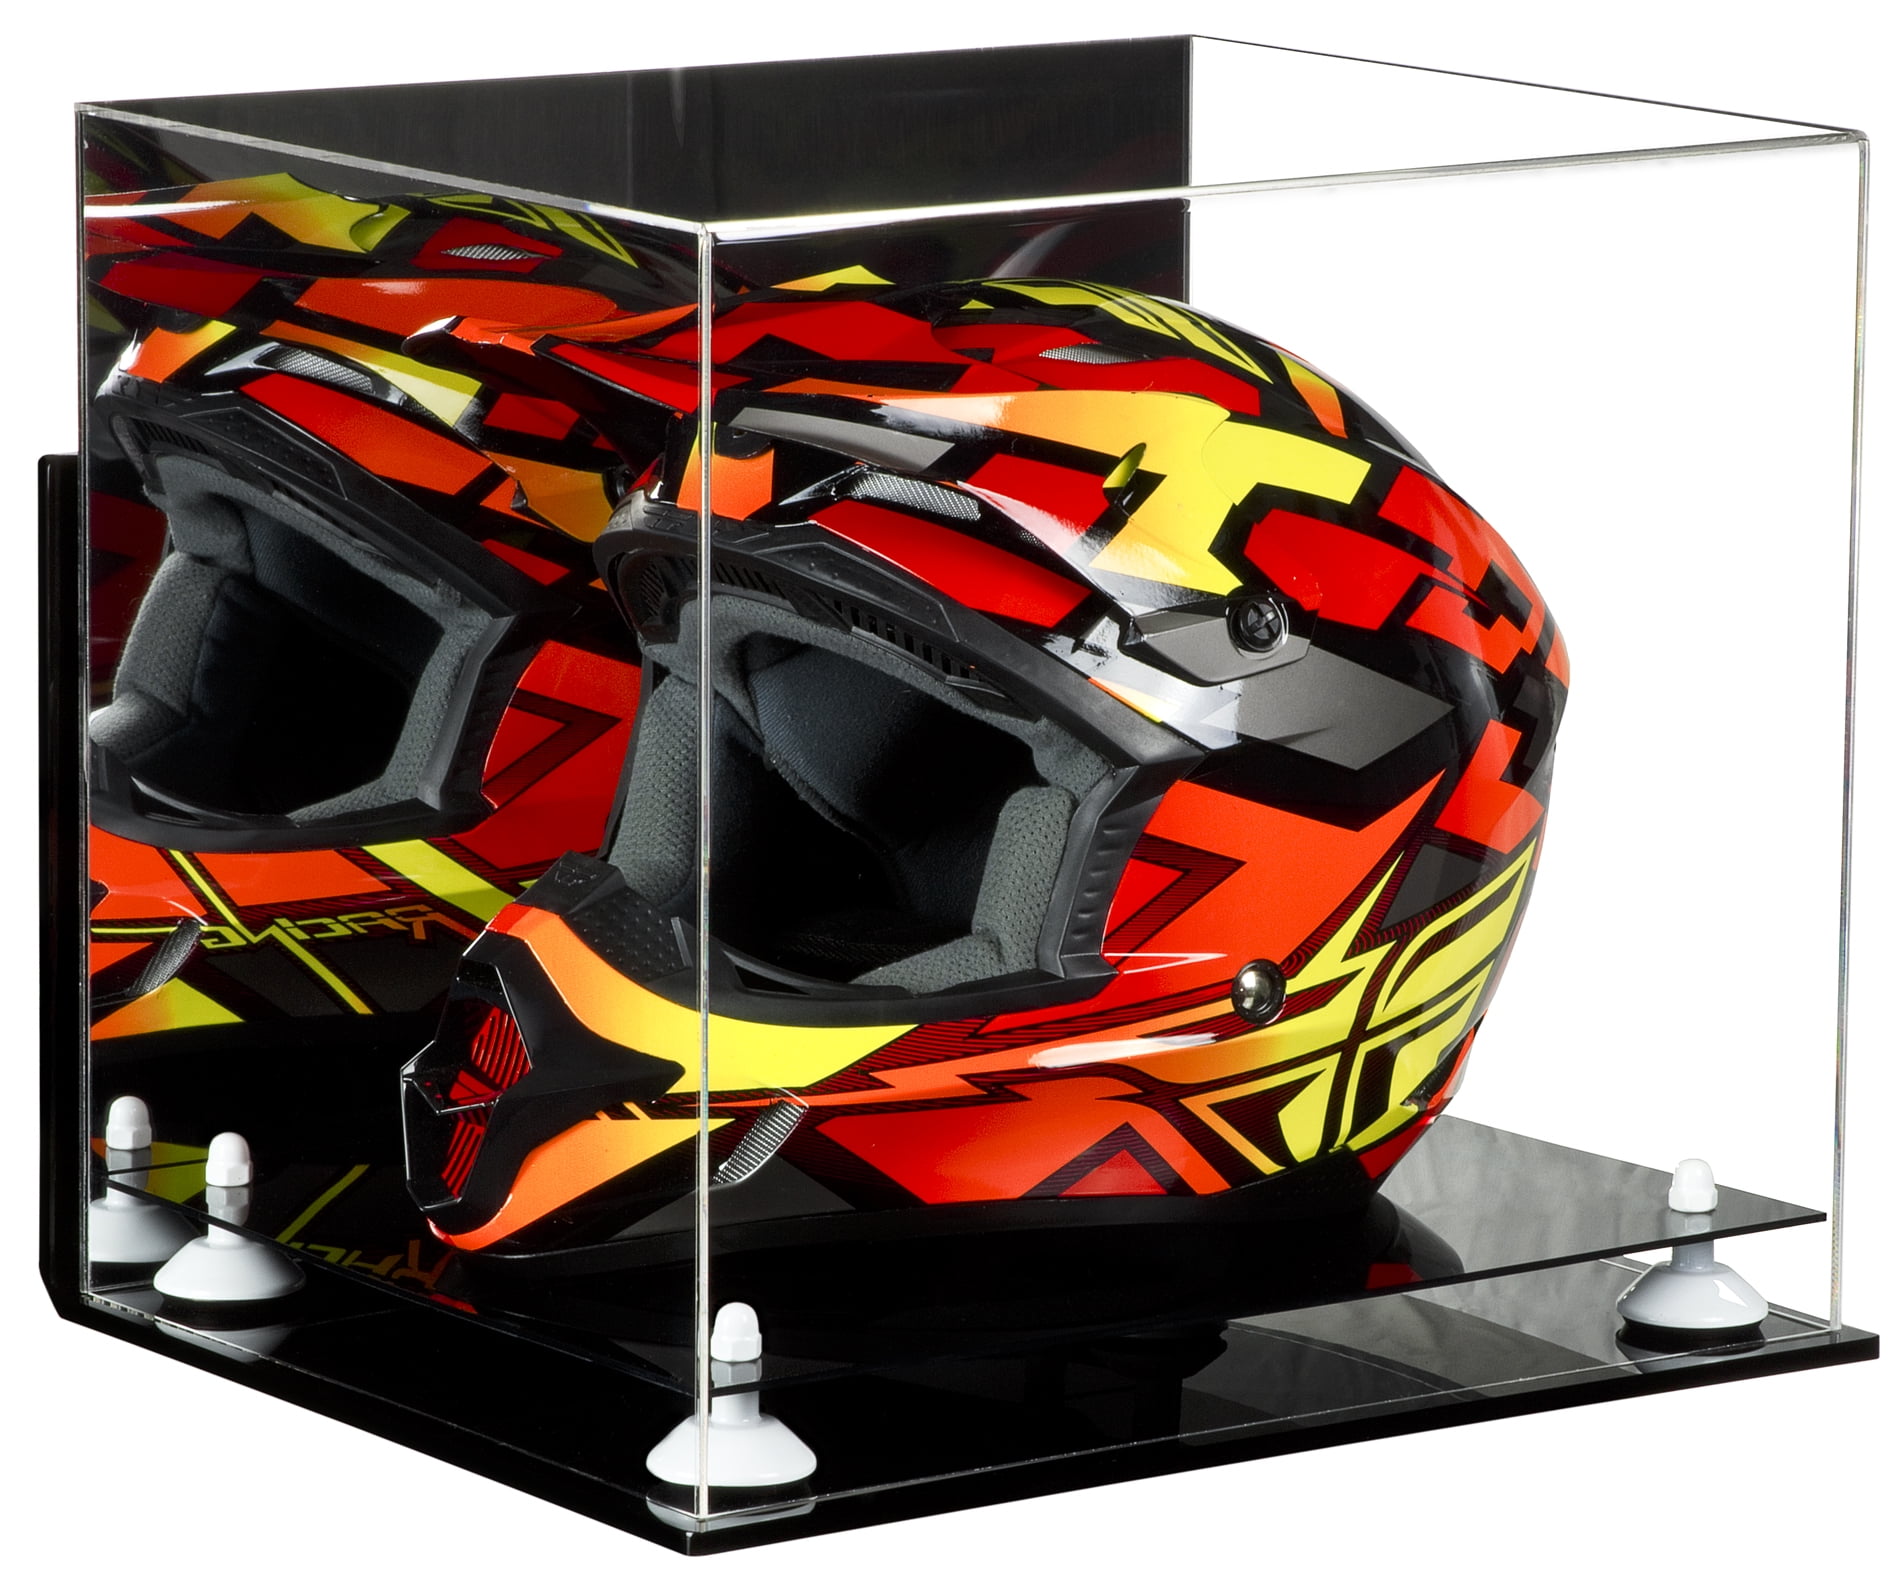 Deluxe Acrylic Motorcycle Motocross or Nascar Racing Helmet Display Case with White Risers